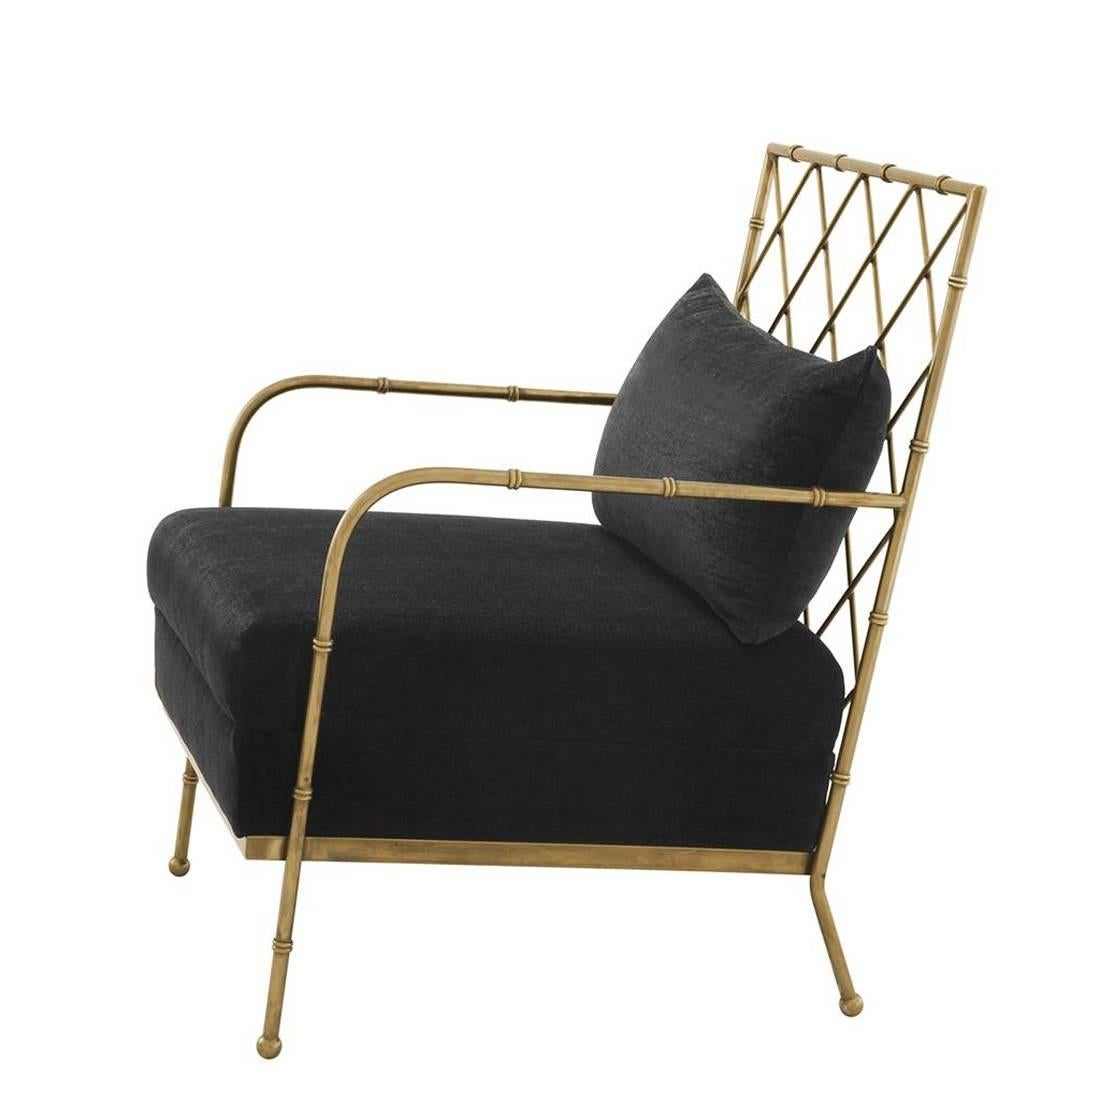 Armchair Tropic with structure in vintage brass
finish. Upholstered with black velvet fabric, with
fire retardant treatment.
Also available with structure in nickel finish.
Also available in Folding Chair Tropic in brass 
or nickel finish.
